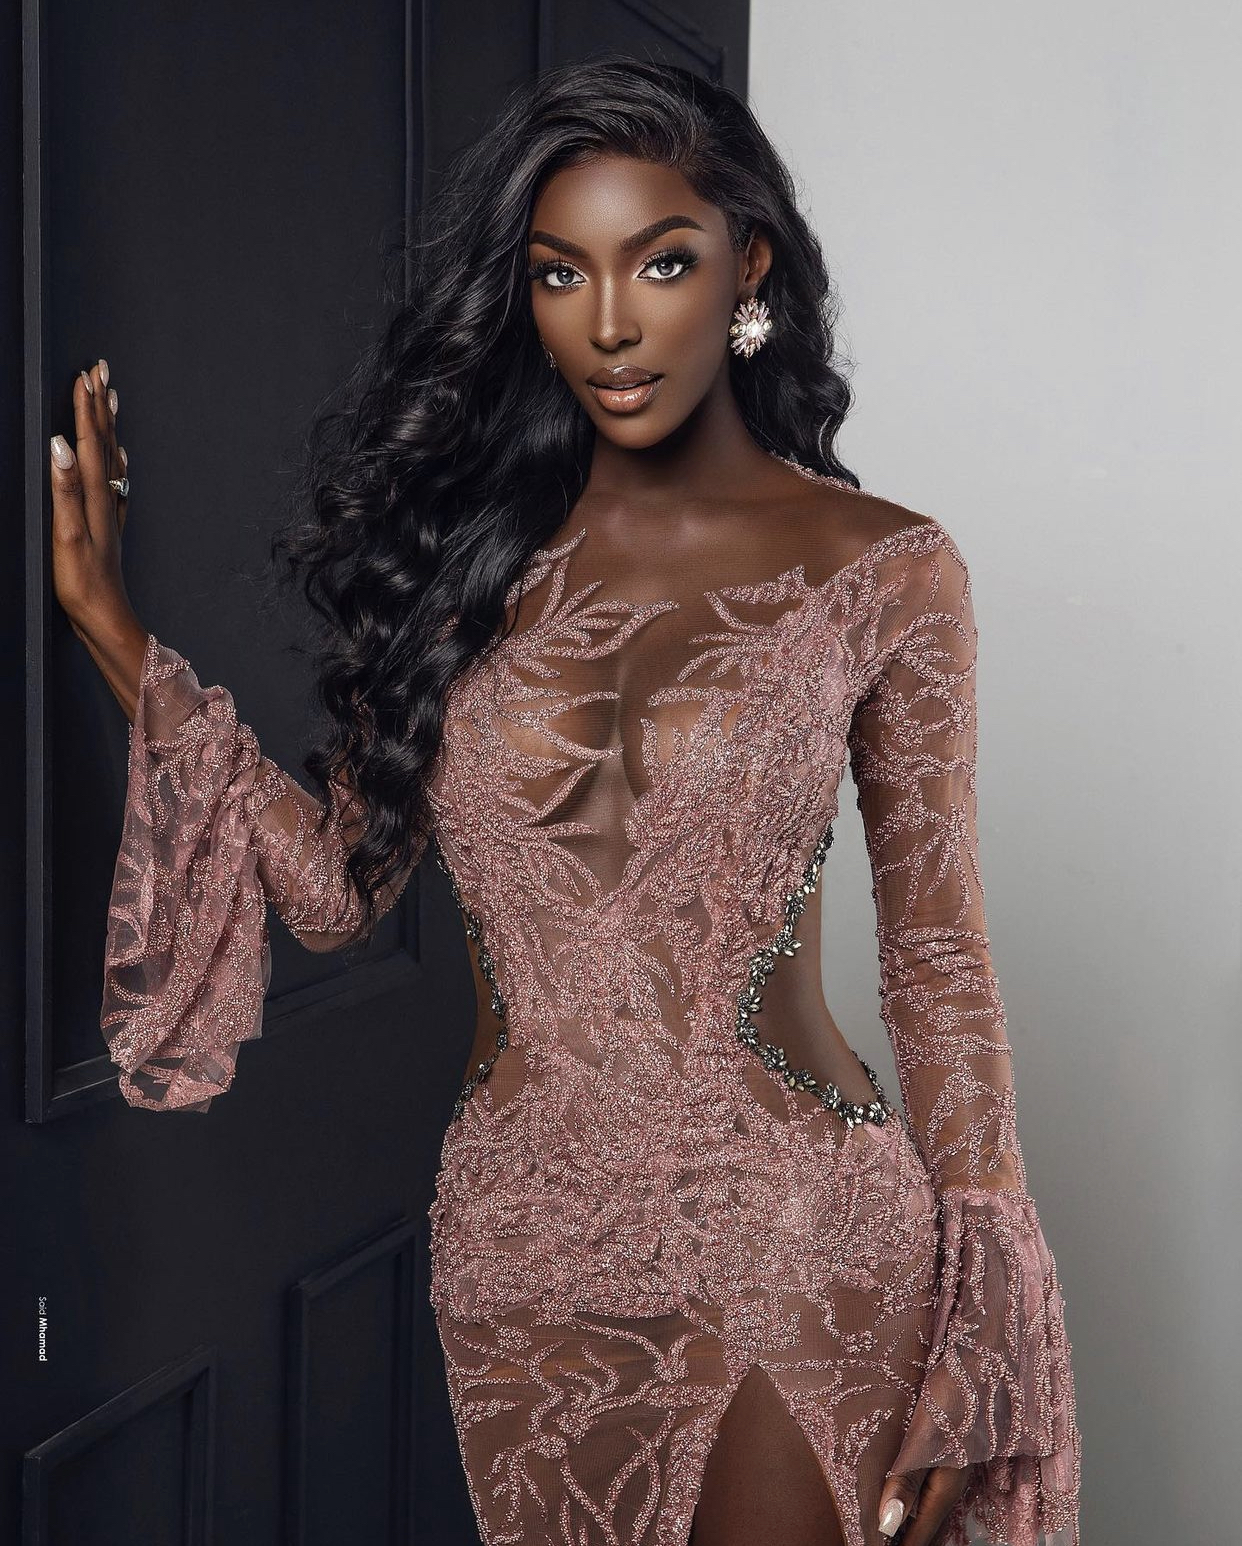 Take a look at 15 stunning photos of Olivia Yace, The Miss World 2nd Runner Up From Ivory Coast